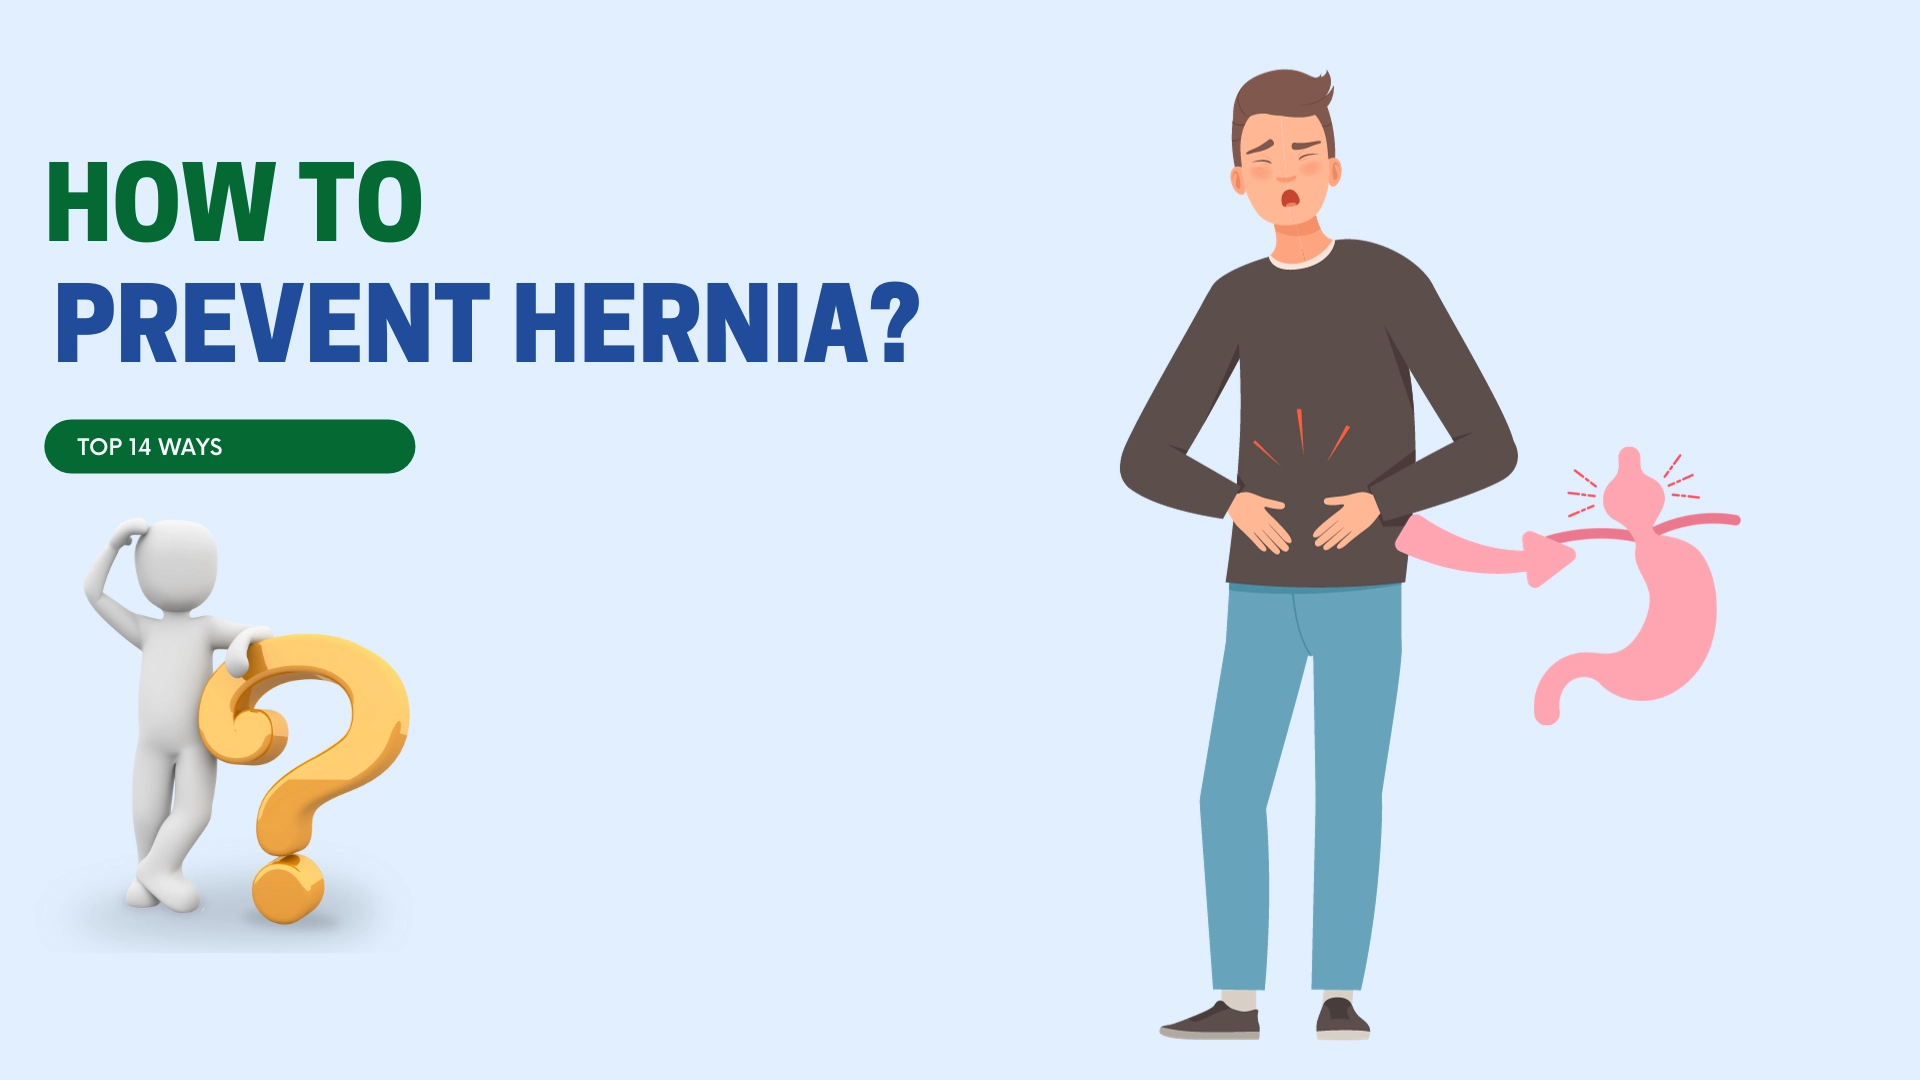 How to prevent hernia